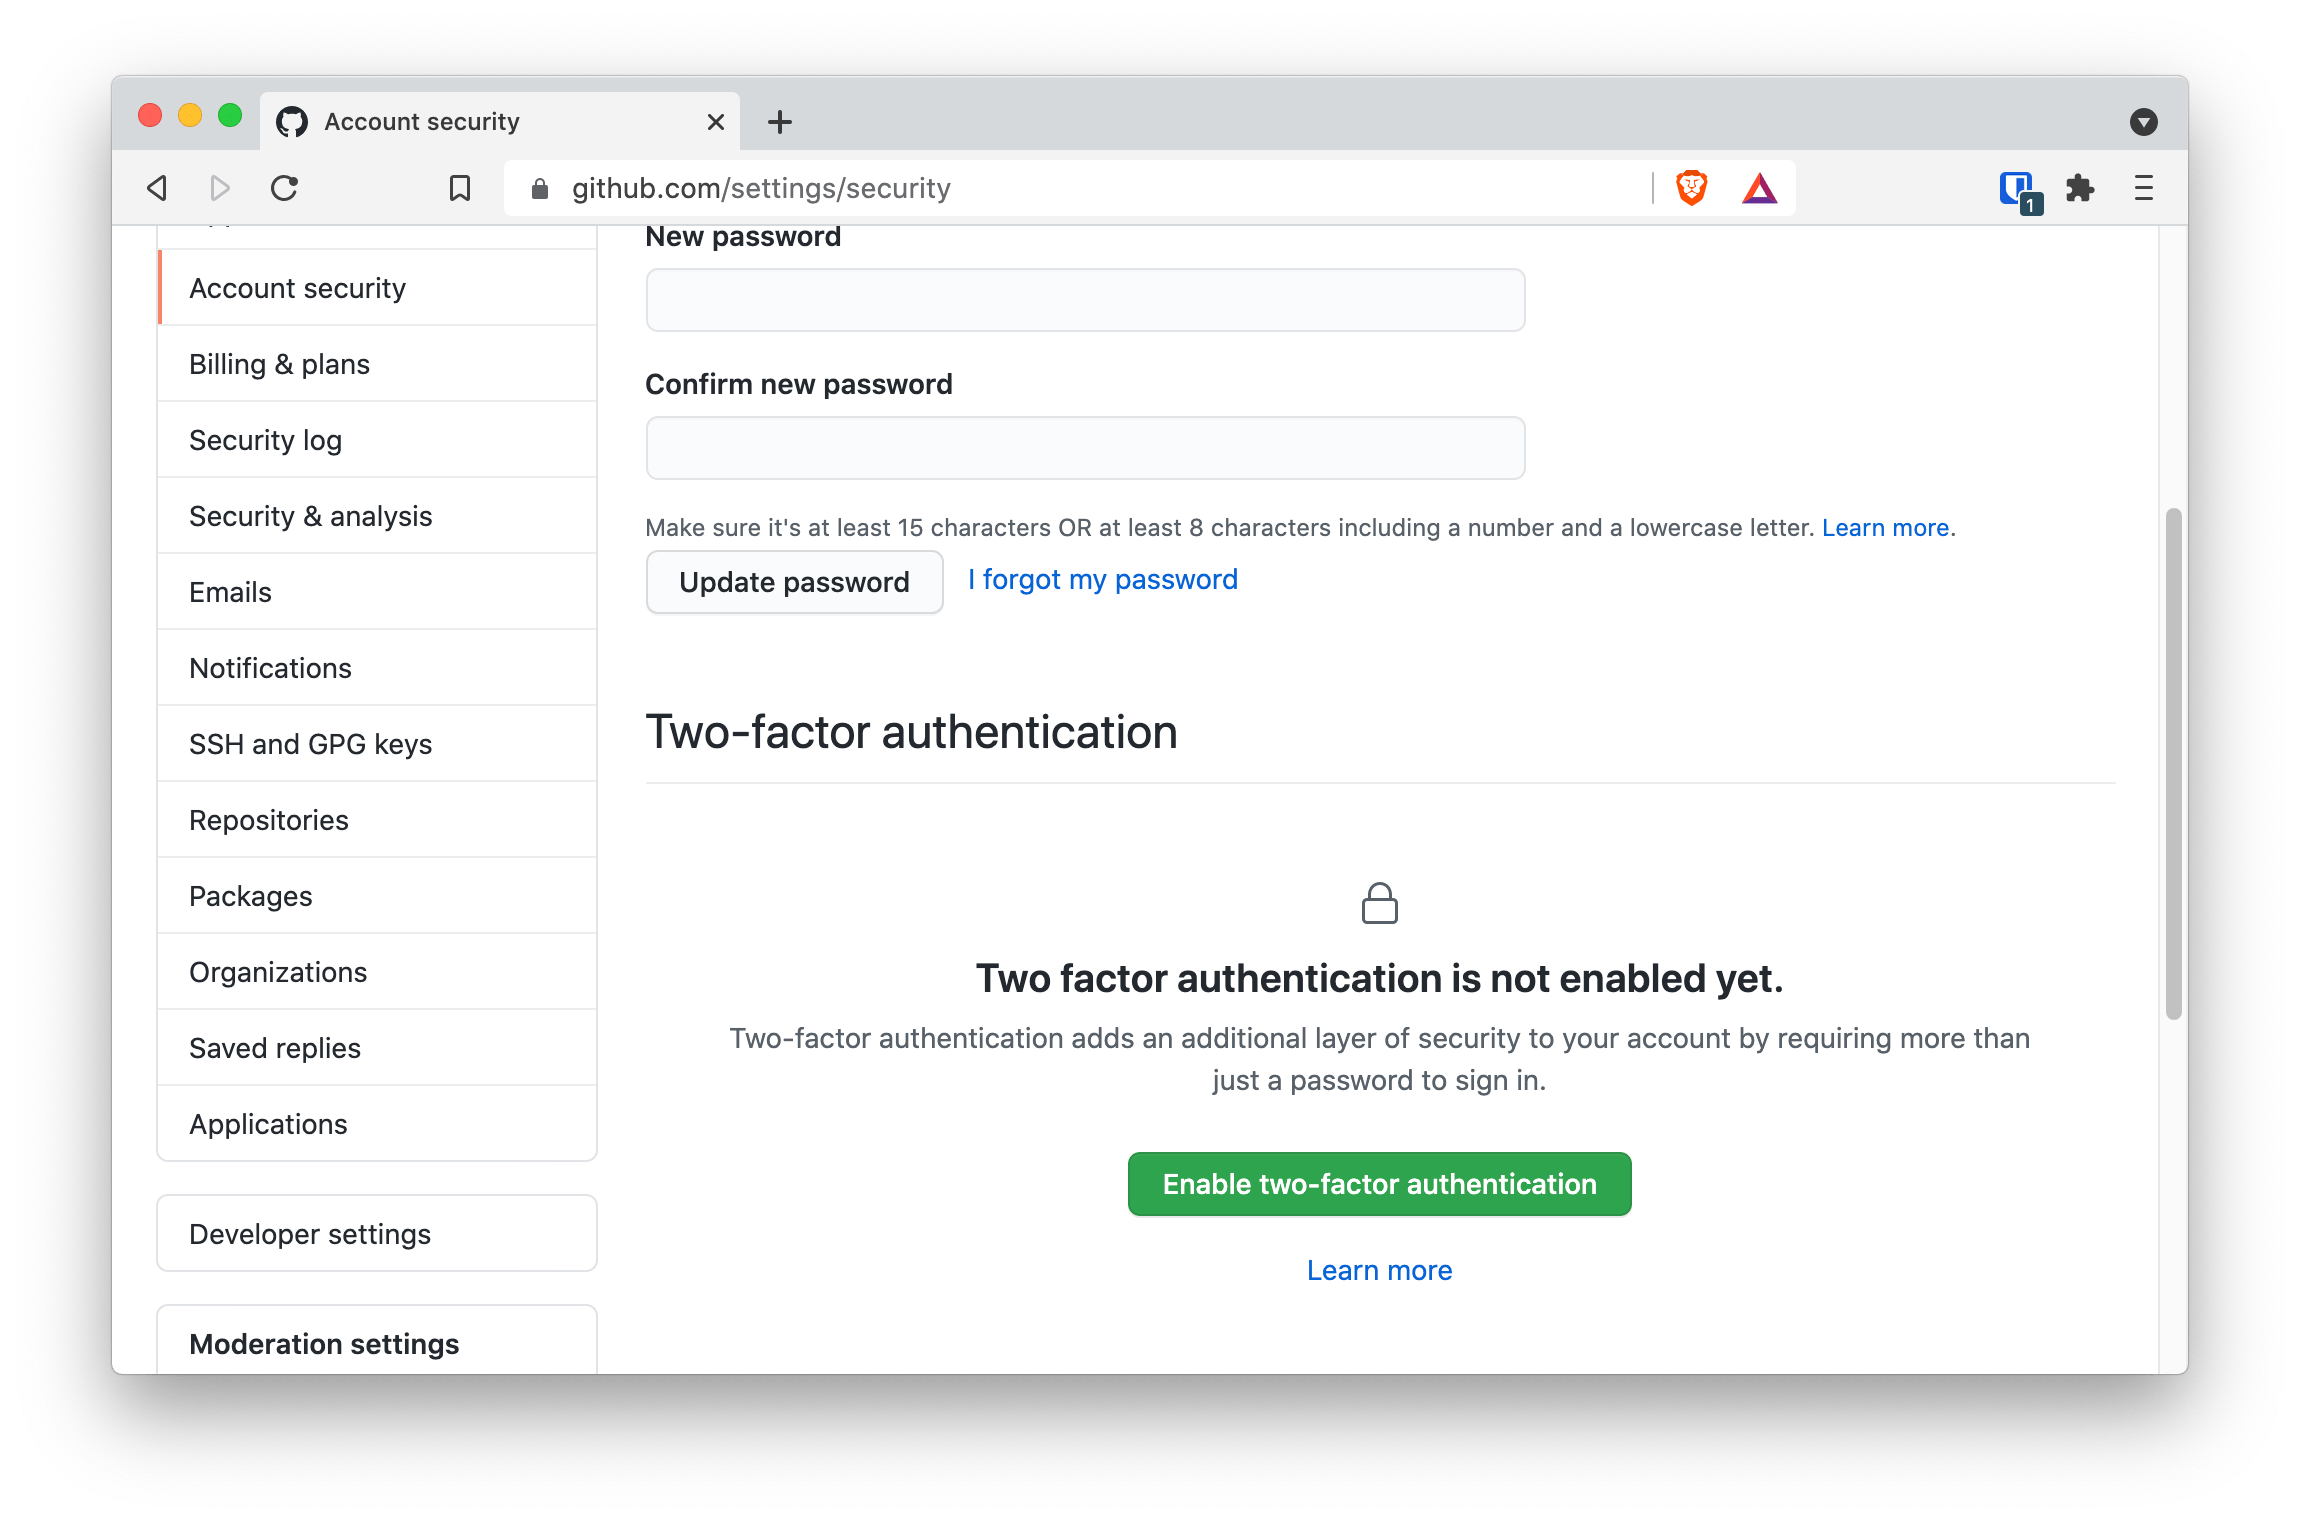 Enabling two-factor authentication in GitHub